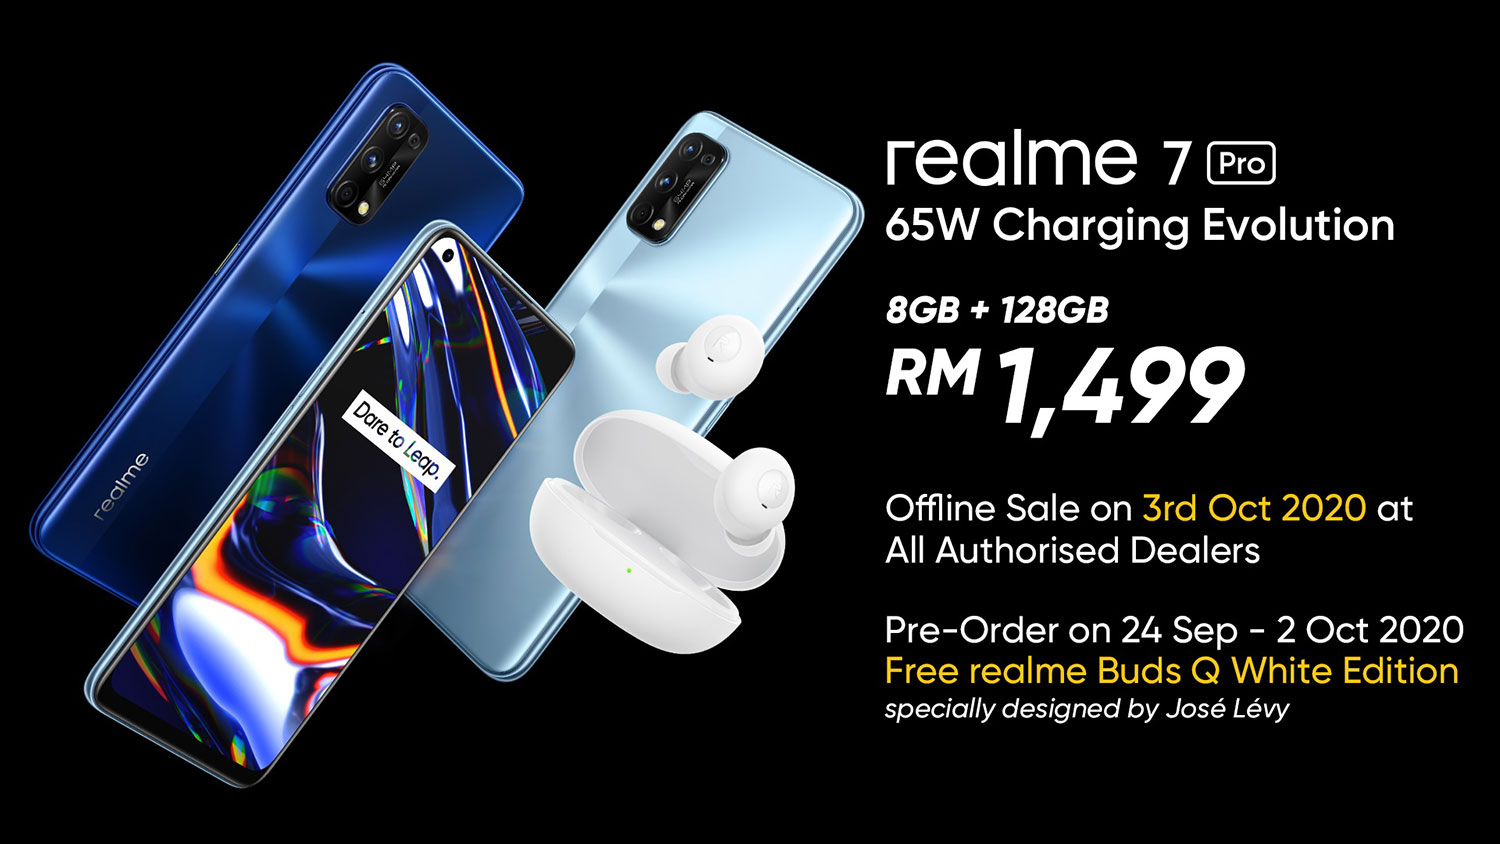 realme 7 Series Now Available for Pre-Order